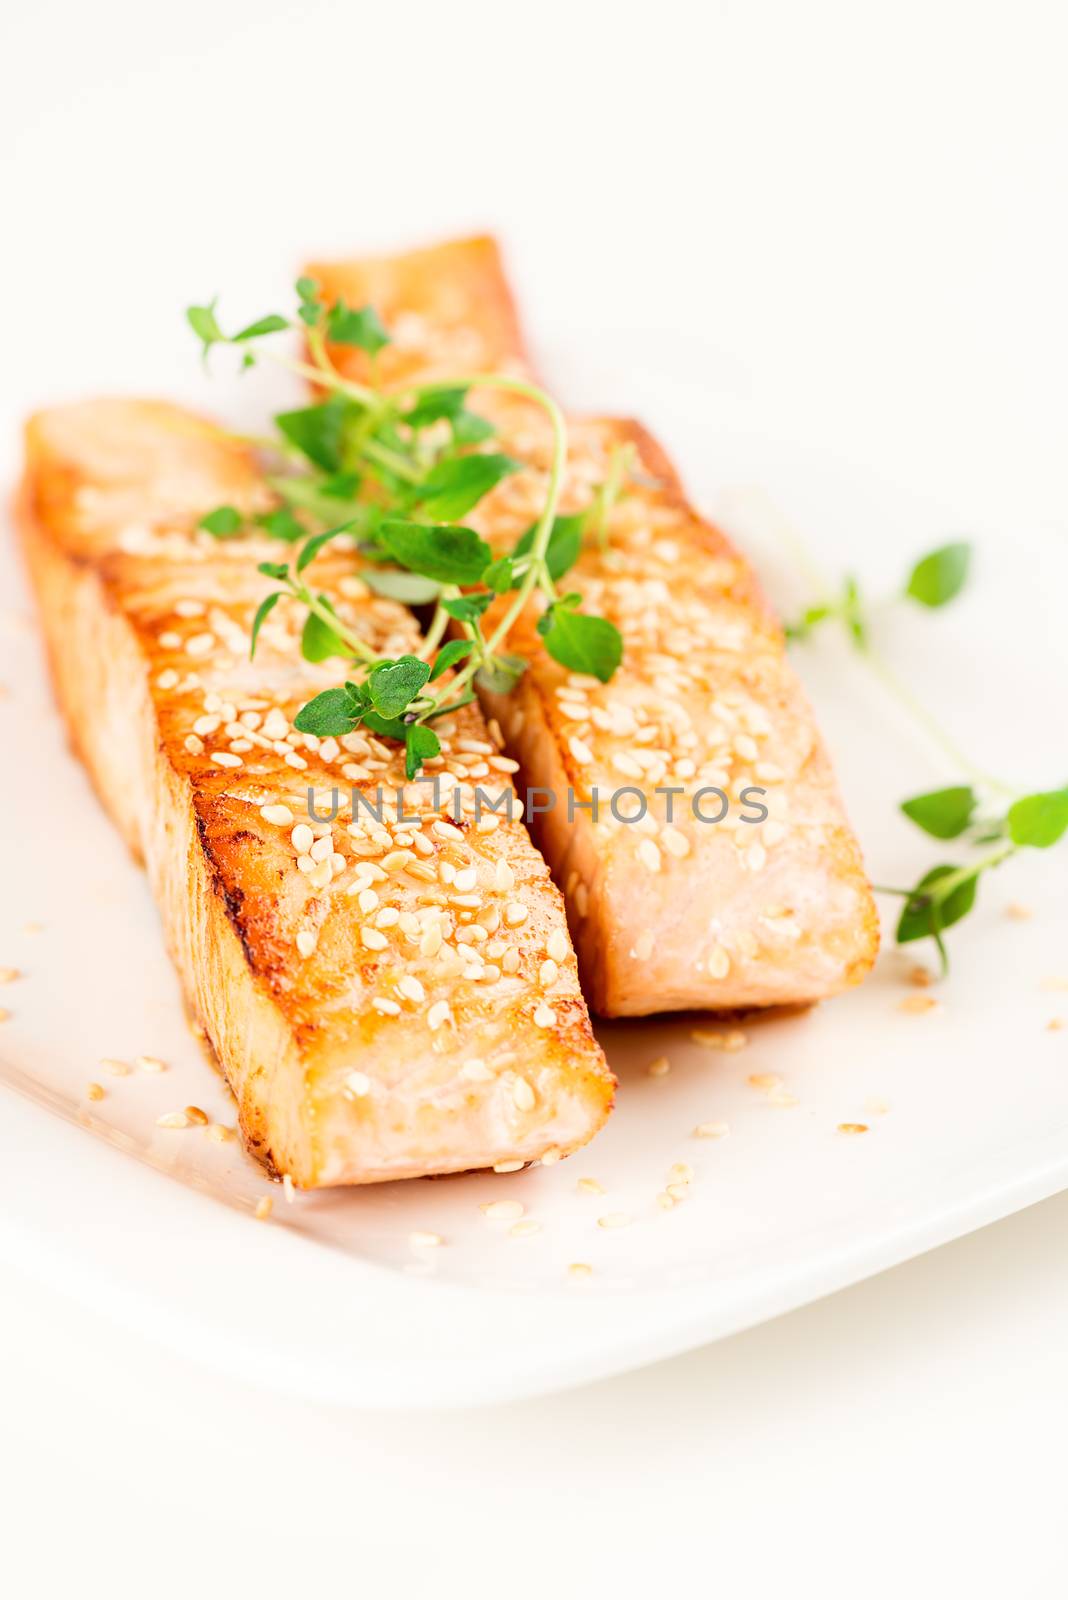 Grilled salmon on white plate vertical by Nanisimova